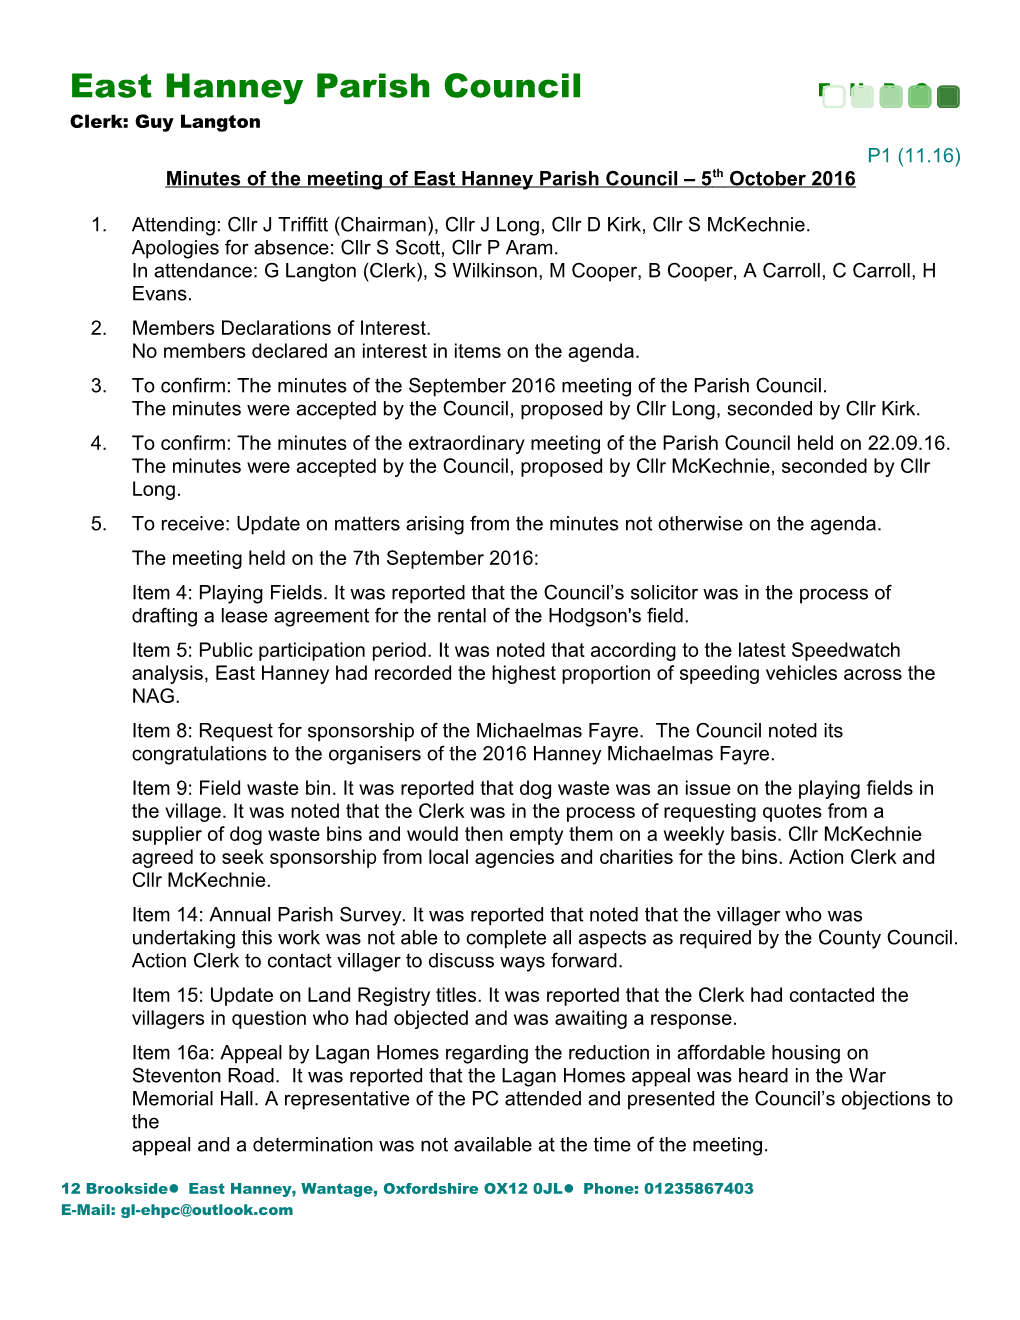 Minutes of the Meeting of East Hanney Parish Council 5Th October 2016